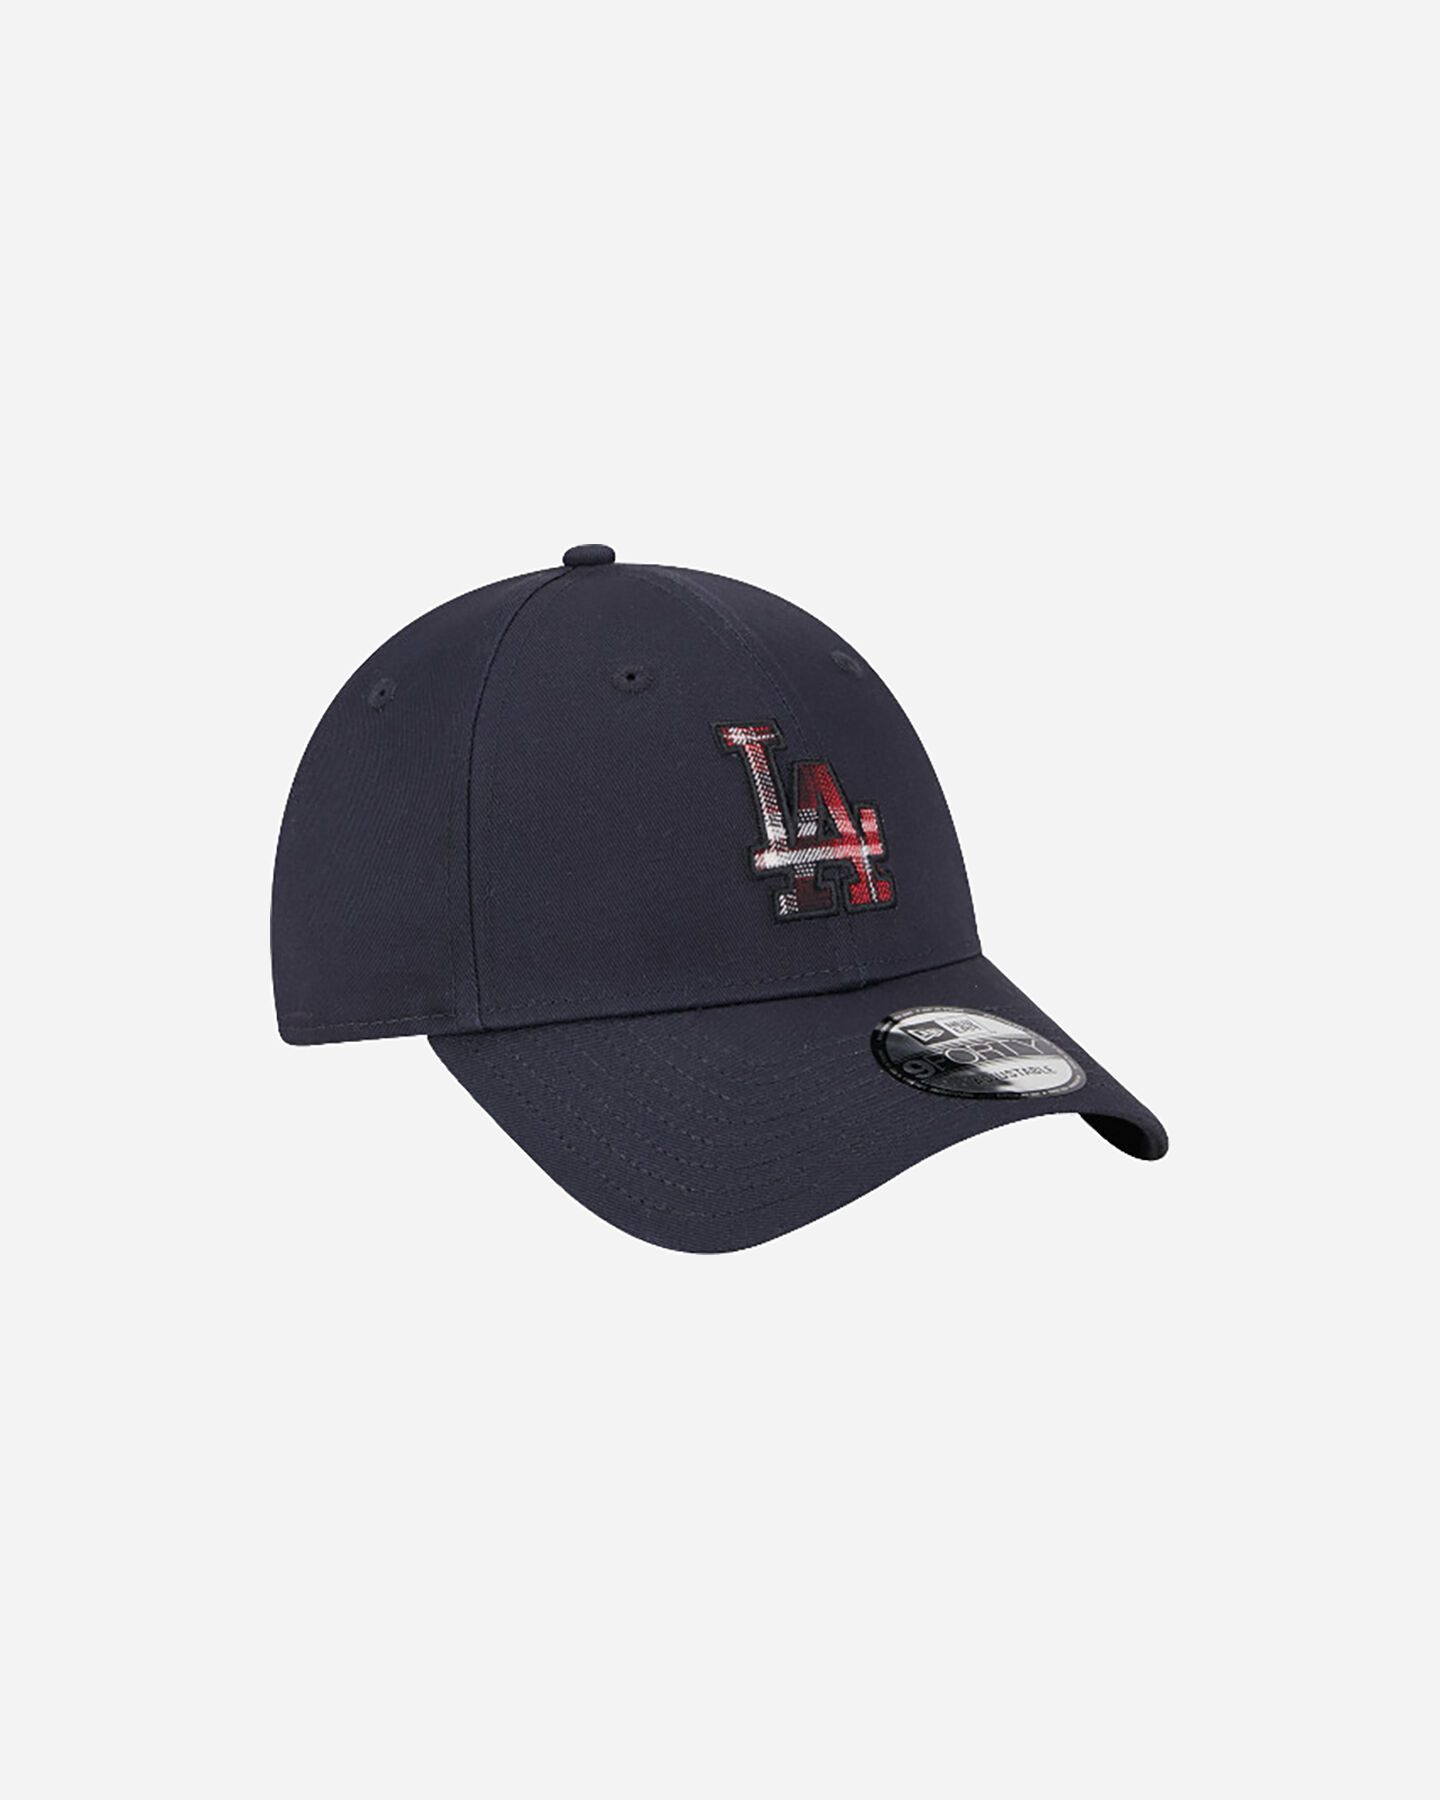  Cappellino NEW ERA 9FORTY MLB CHECK INFILL LOS ANGELES DODGERS  S5630873|410|OSFM scatto 2